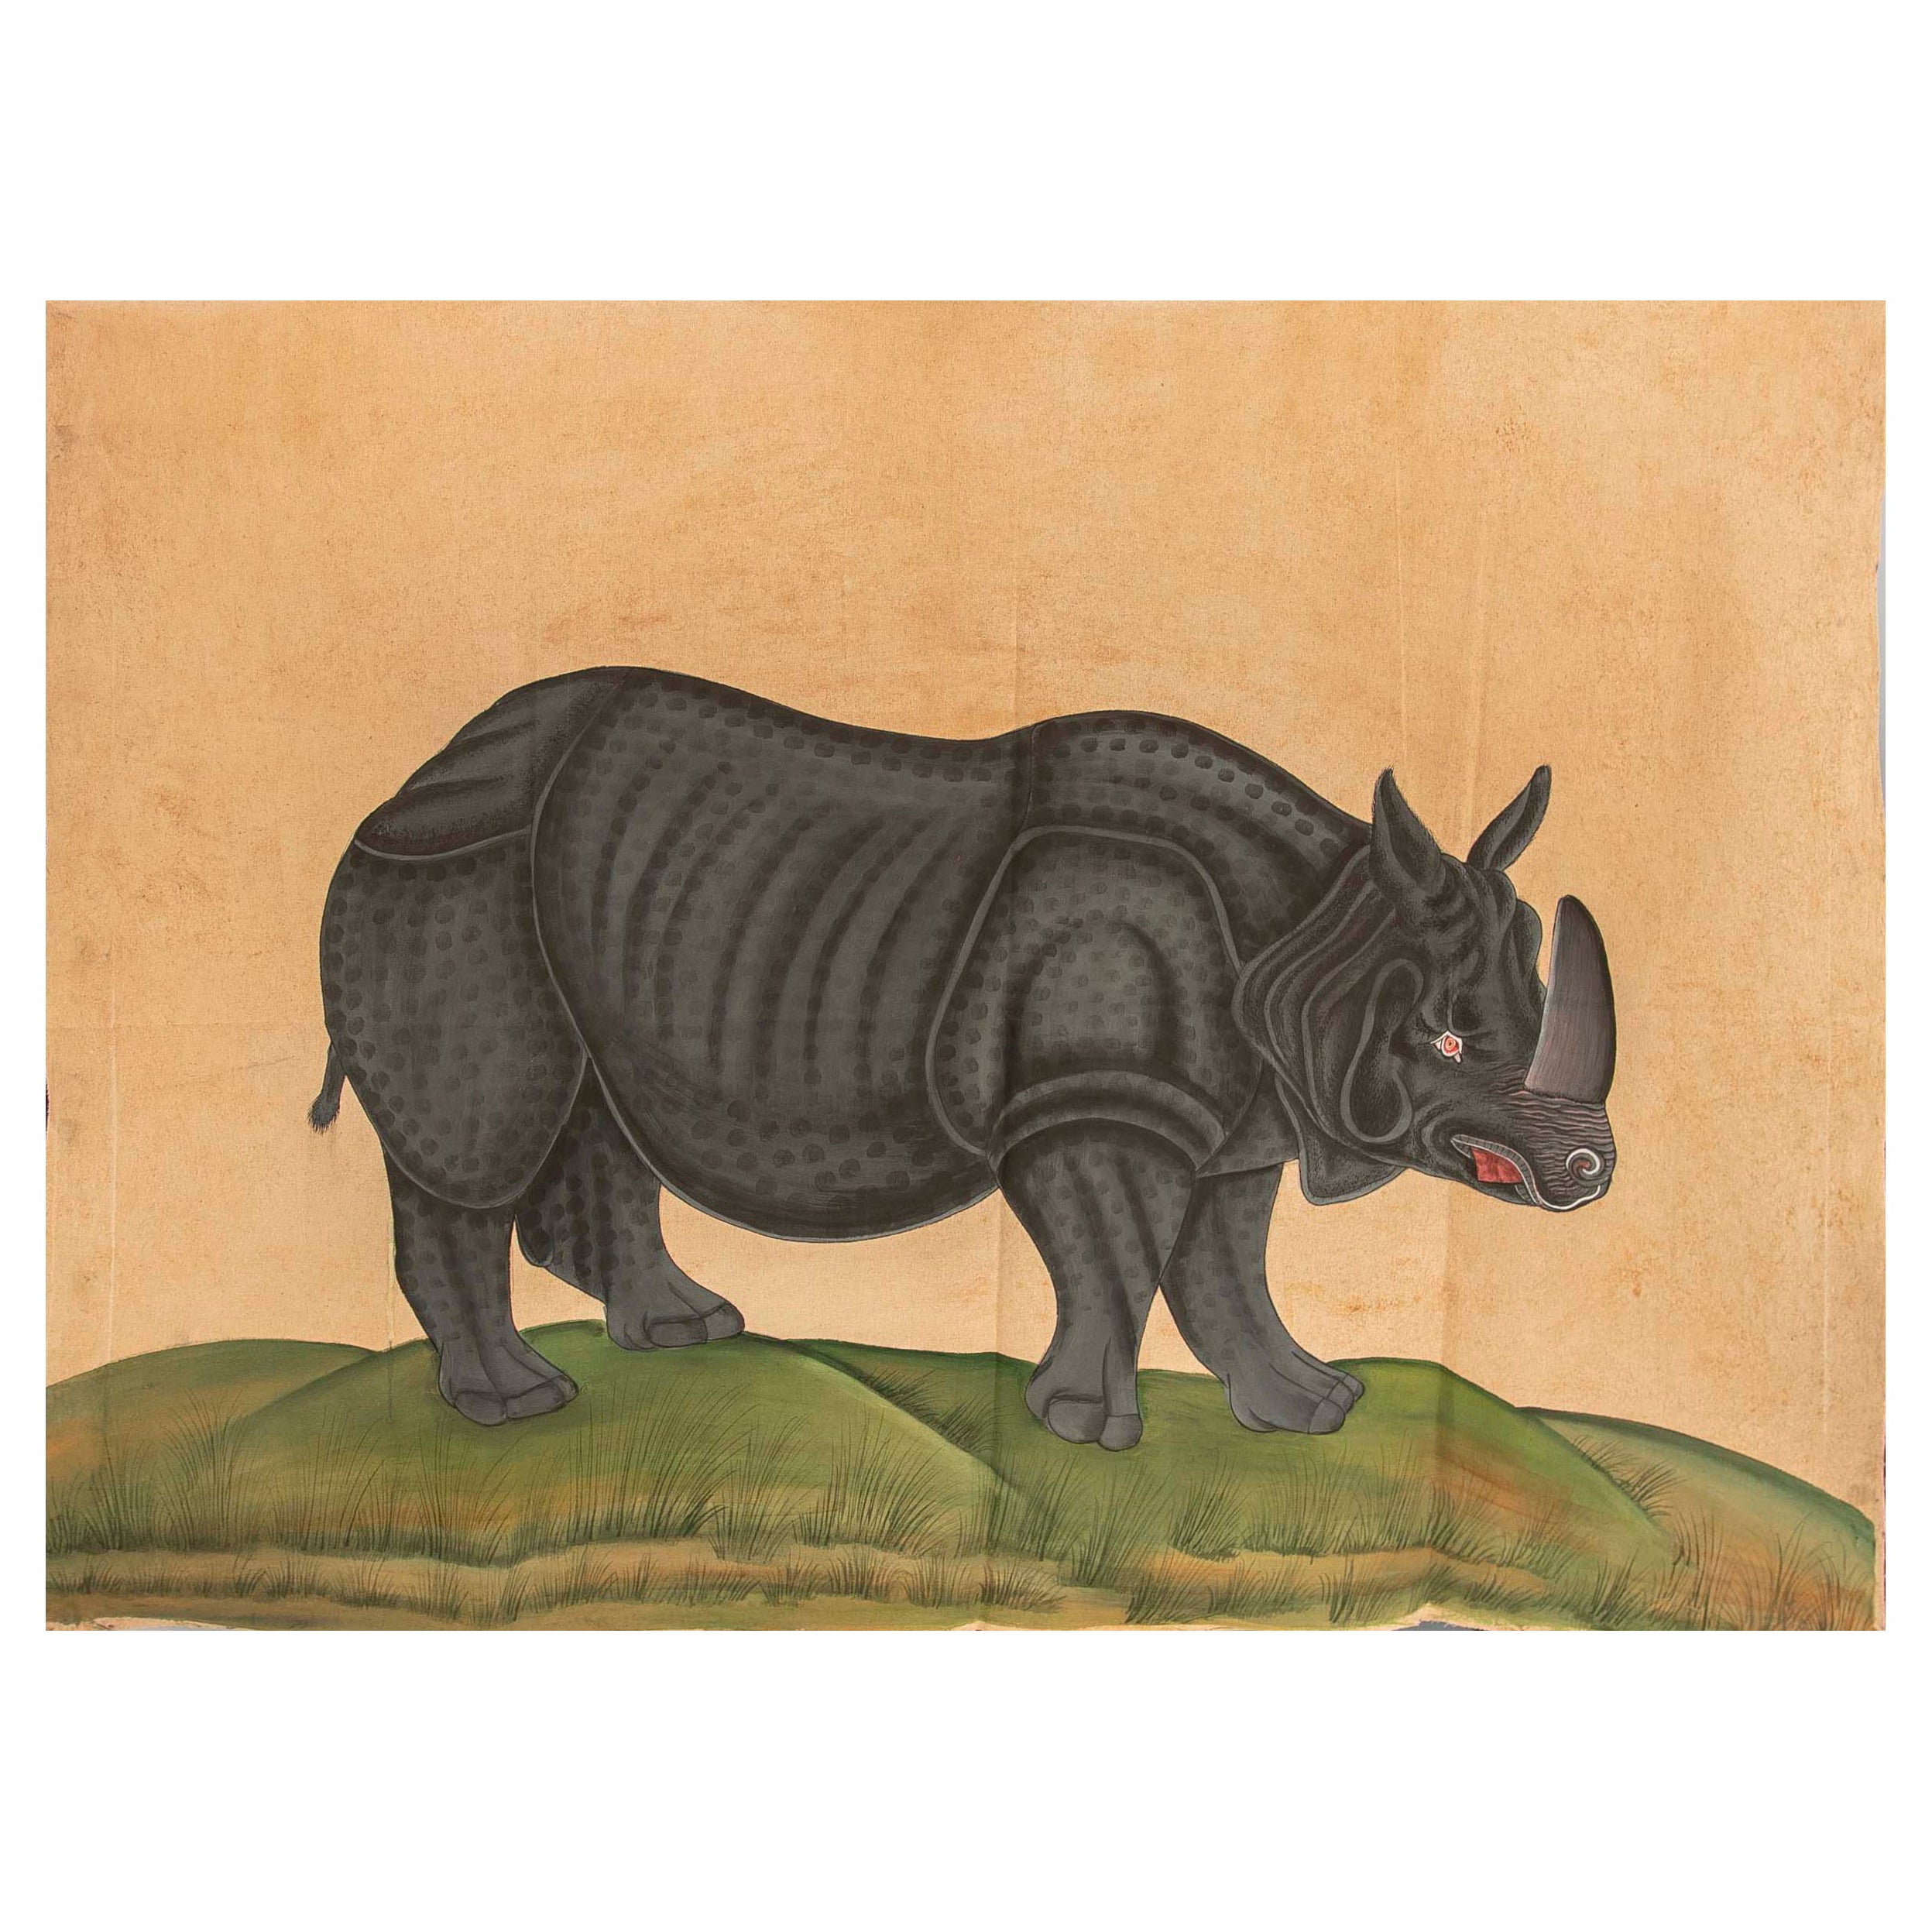 1970s Jaime Parlade's Designer Hand Painted "Rhino" Oil on Canvas For Sale